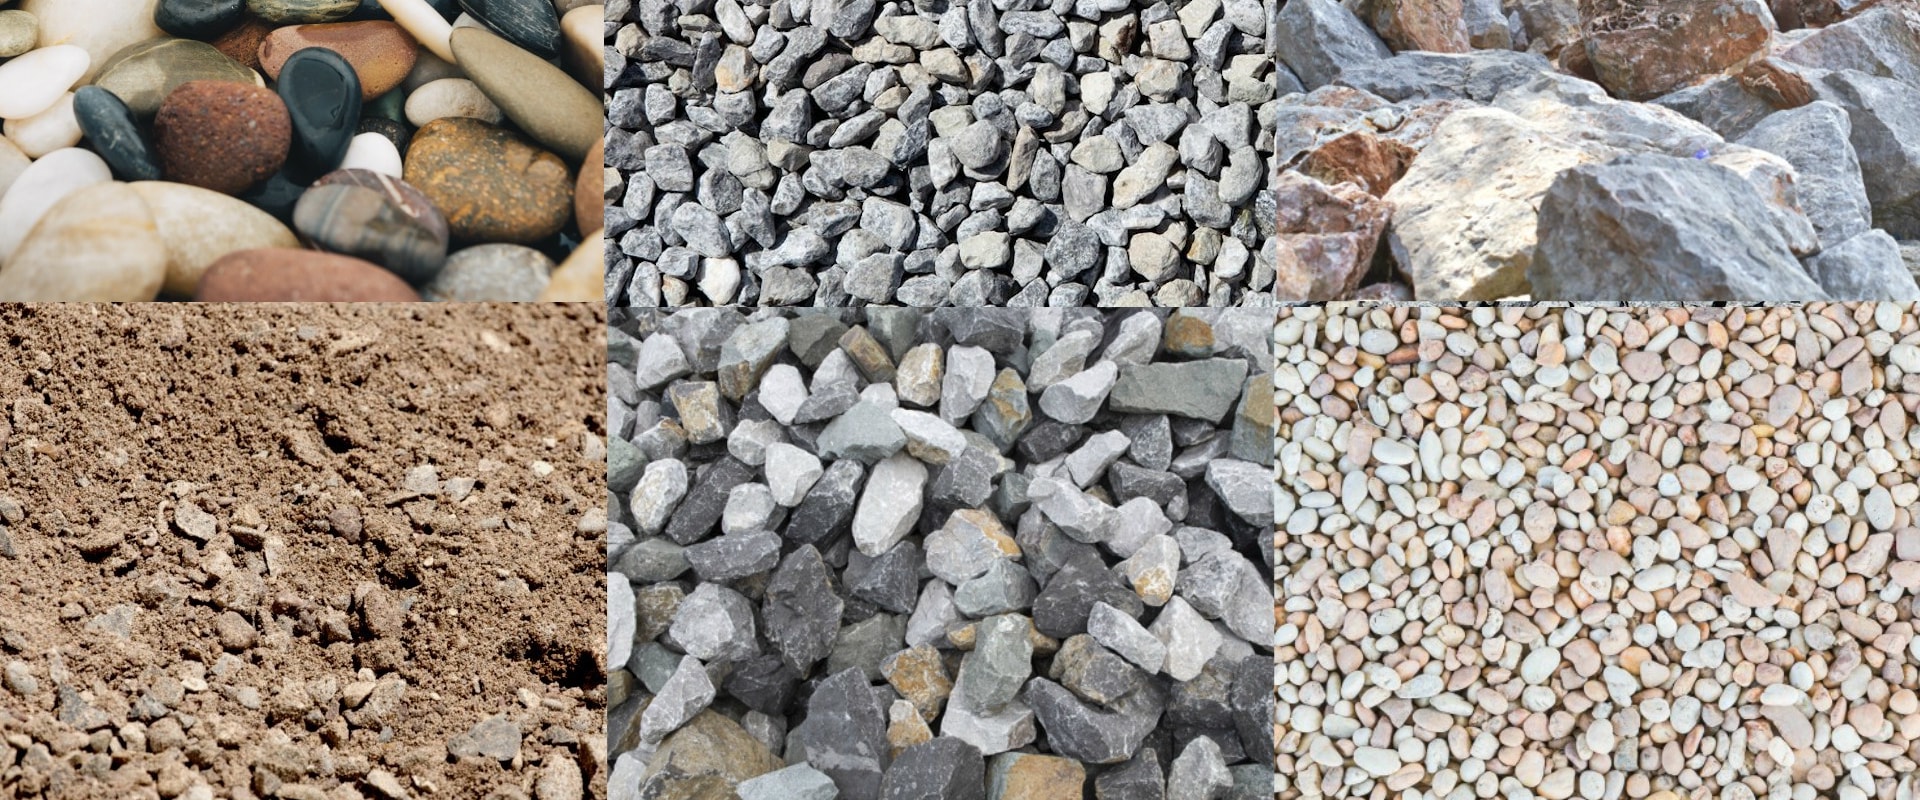 Classifying Aggregates: A Petrological Guide